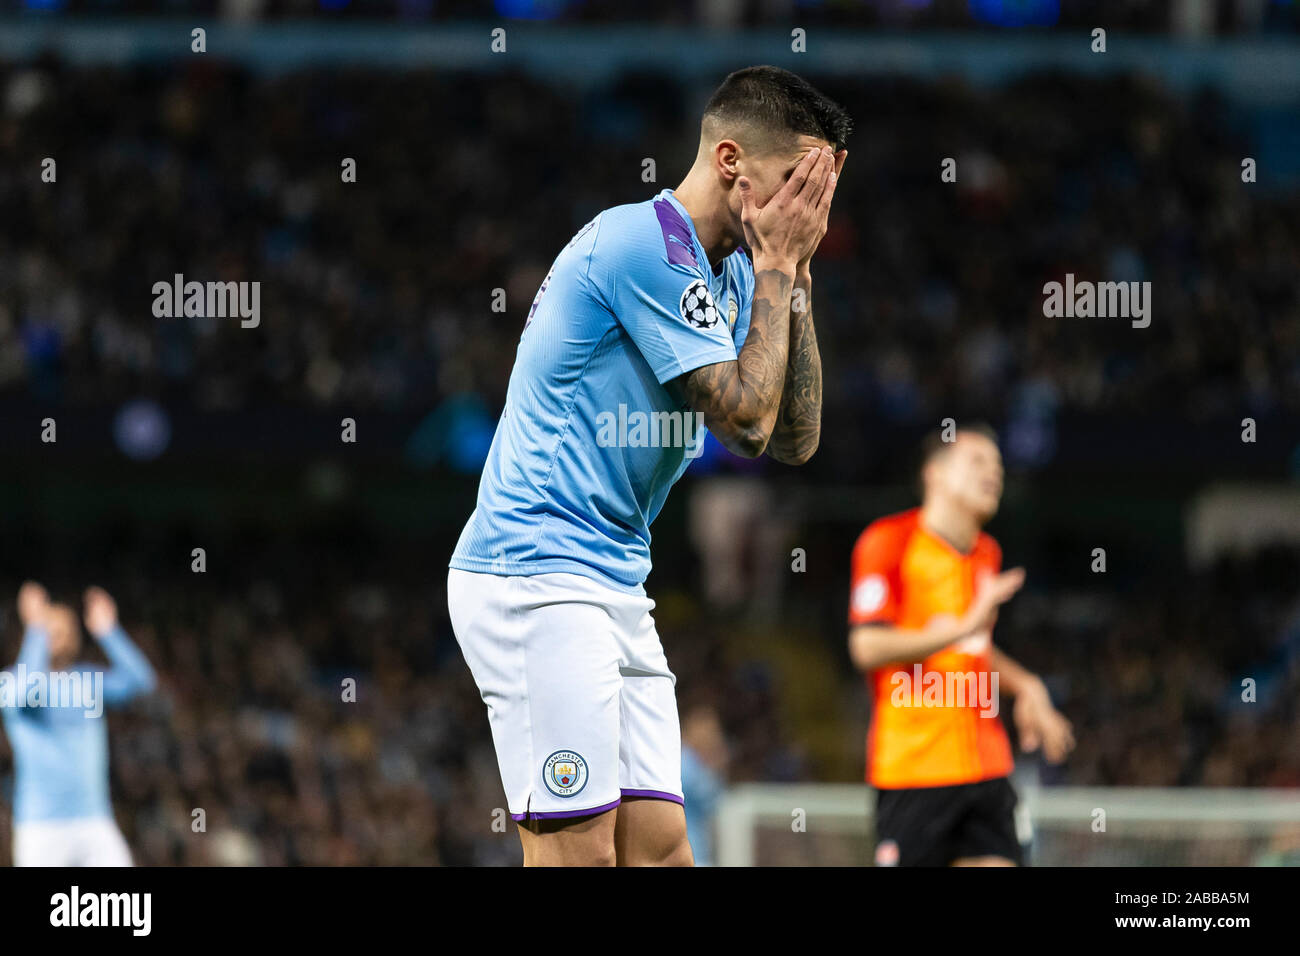 Manchester, UK. 26th Nov, 2019. Joao Cancelo of Manchester City during the UEFA Champions League Group C match between Manchester City and Shakhtar Donetsk at the Etihad Stadium on November 26th 2019 in Manchester, England. (Photo by Daniel Chesterton/phcimages.com) Credit: PHC Images/Alamy Live News Stock Photo